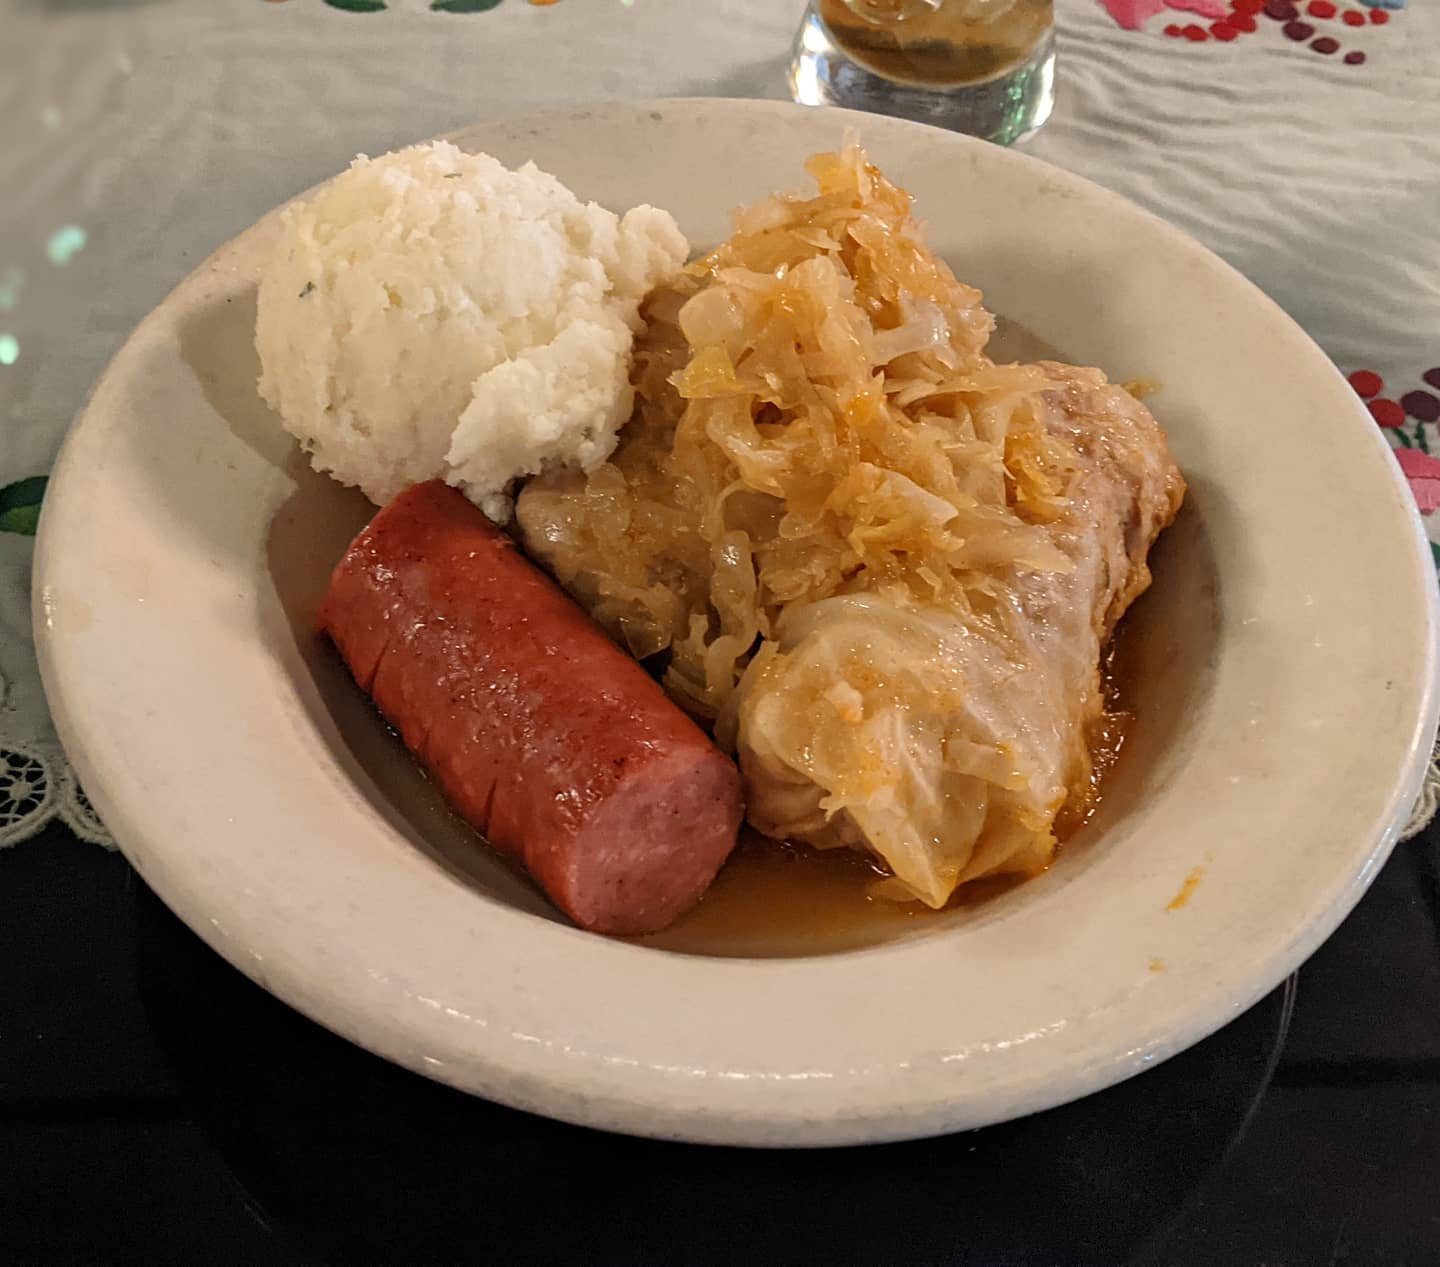 Tonight's #foodporn is Toltott Kaposzta, or Hungarian Stuffed Cabbage. Awesome central European comfort food. #detroit #hungarianrhapsody